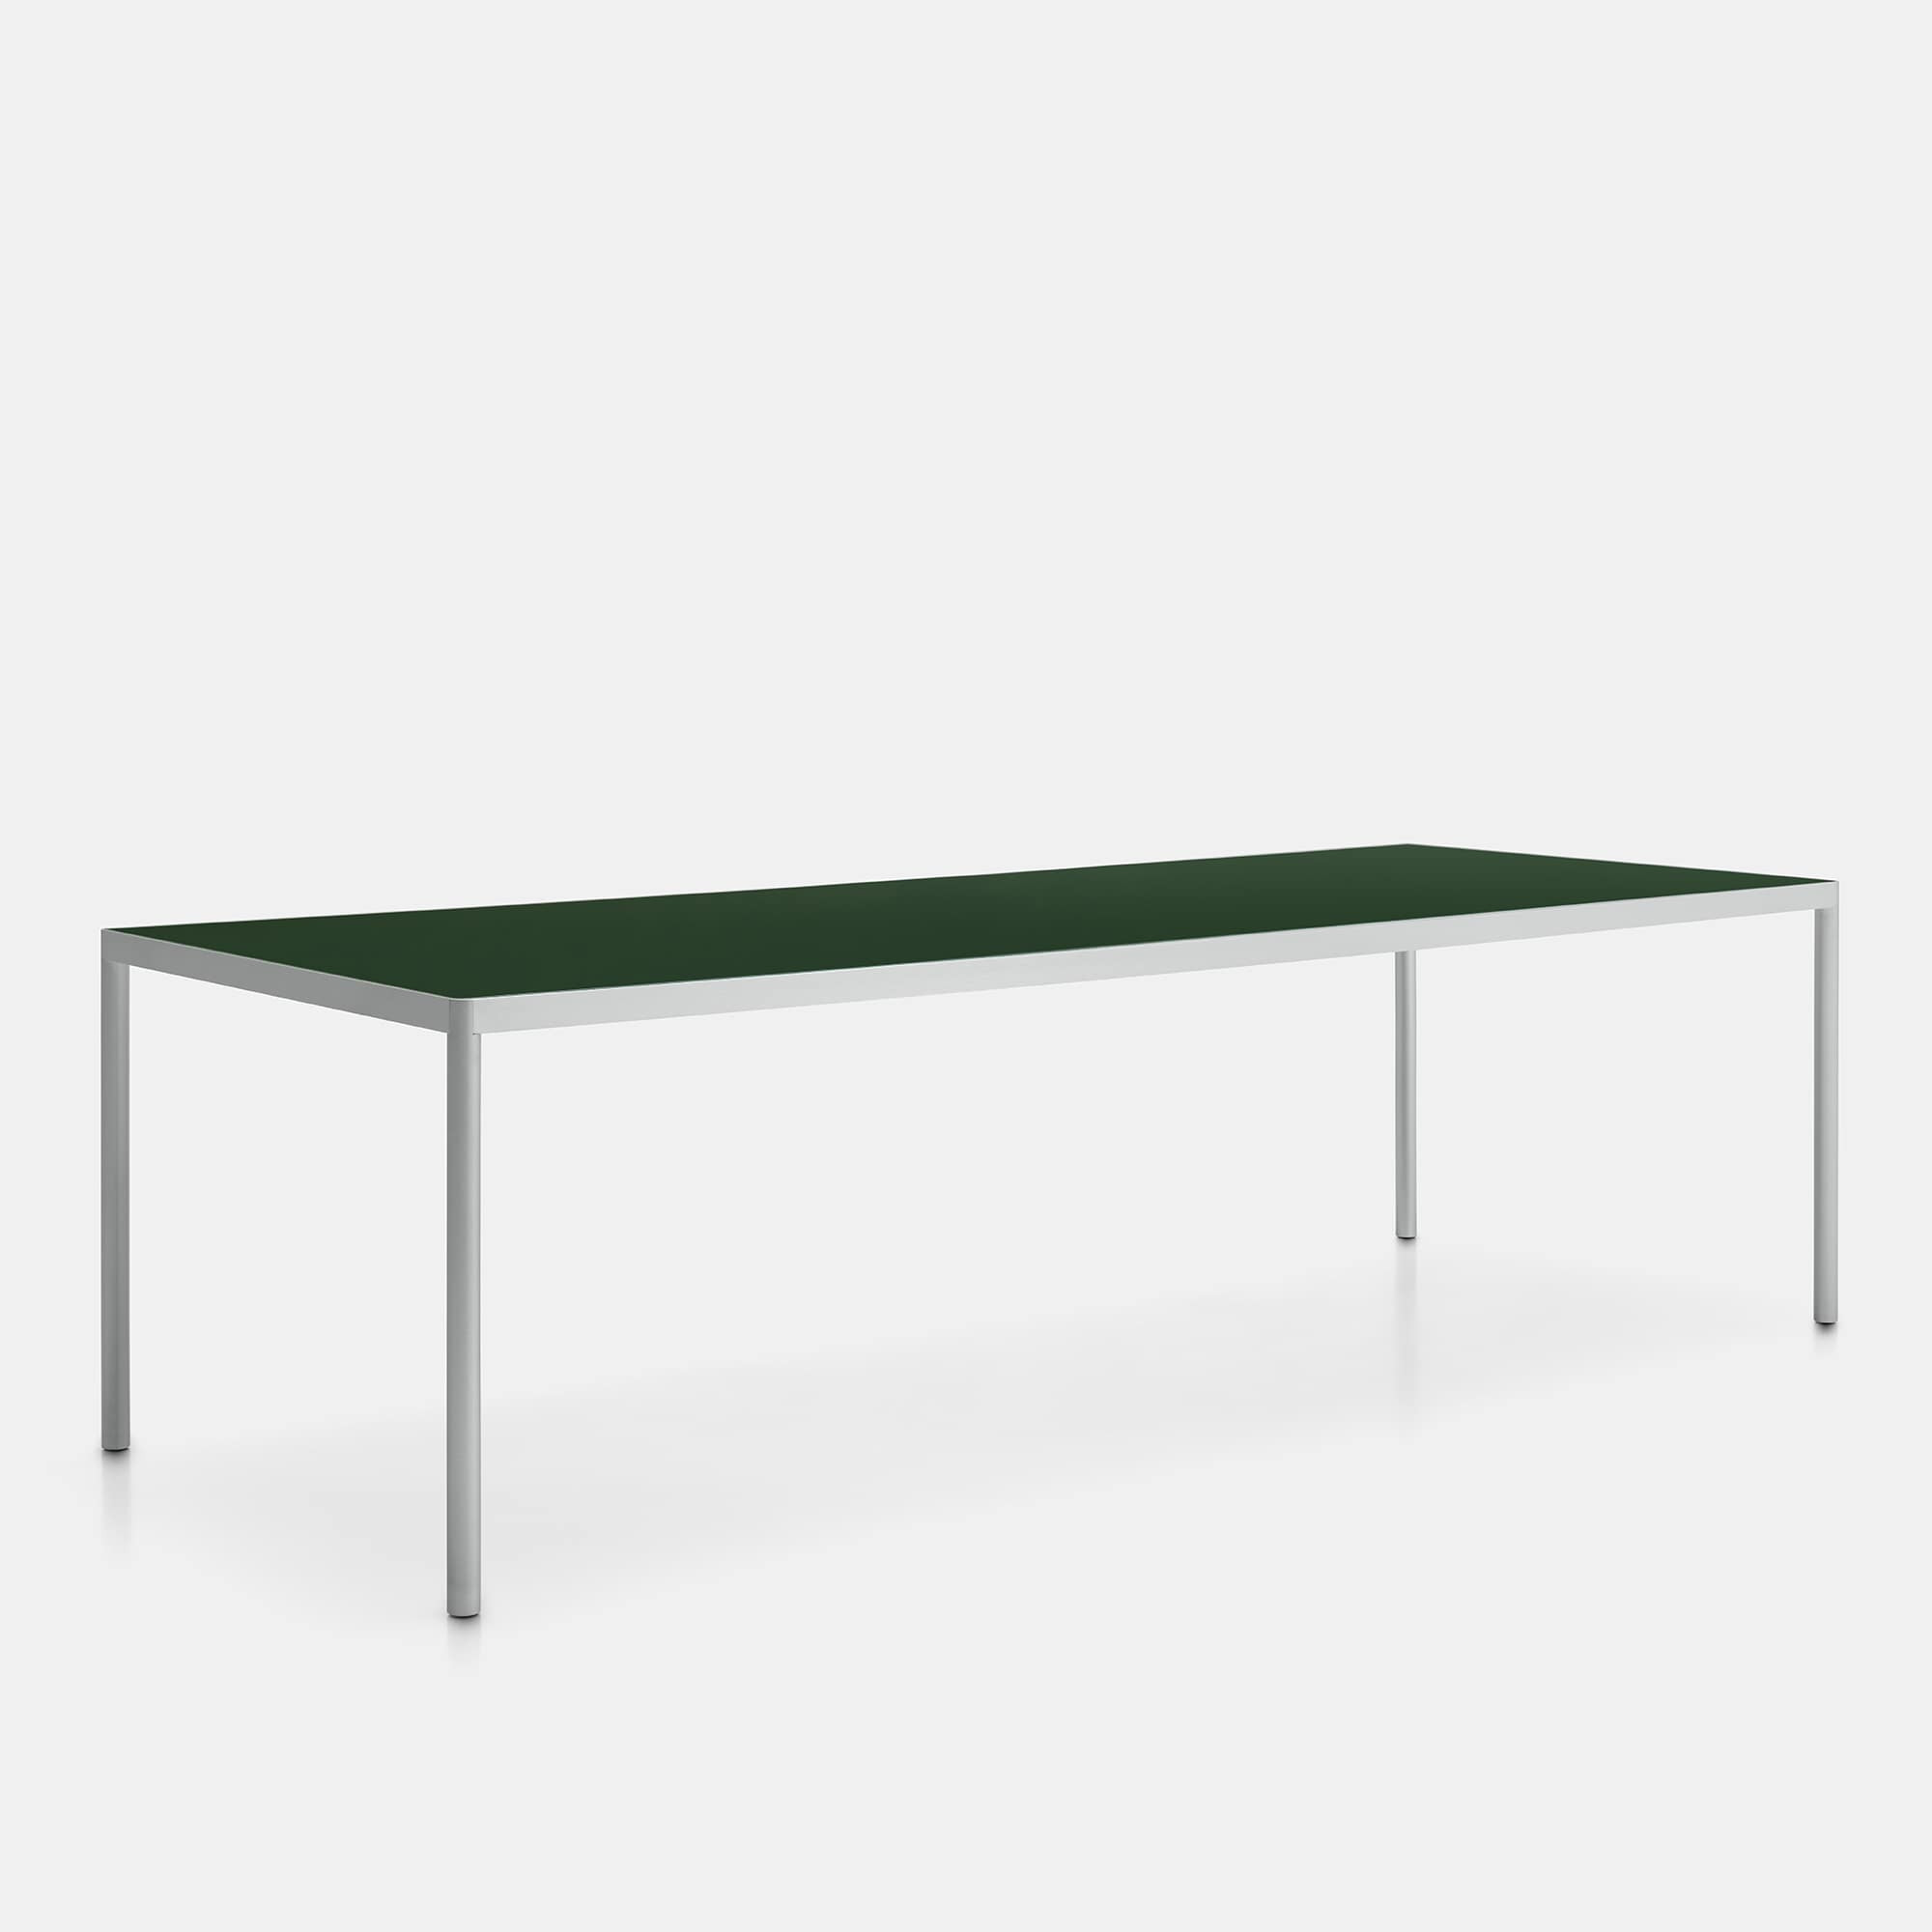 Offset Indoor / Outdoor Table ☞ Use: Indoor ☞ Structure: Brushed Anodised Aluminium X137 ☞ Top: Reconstructed Stone White Calce X131